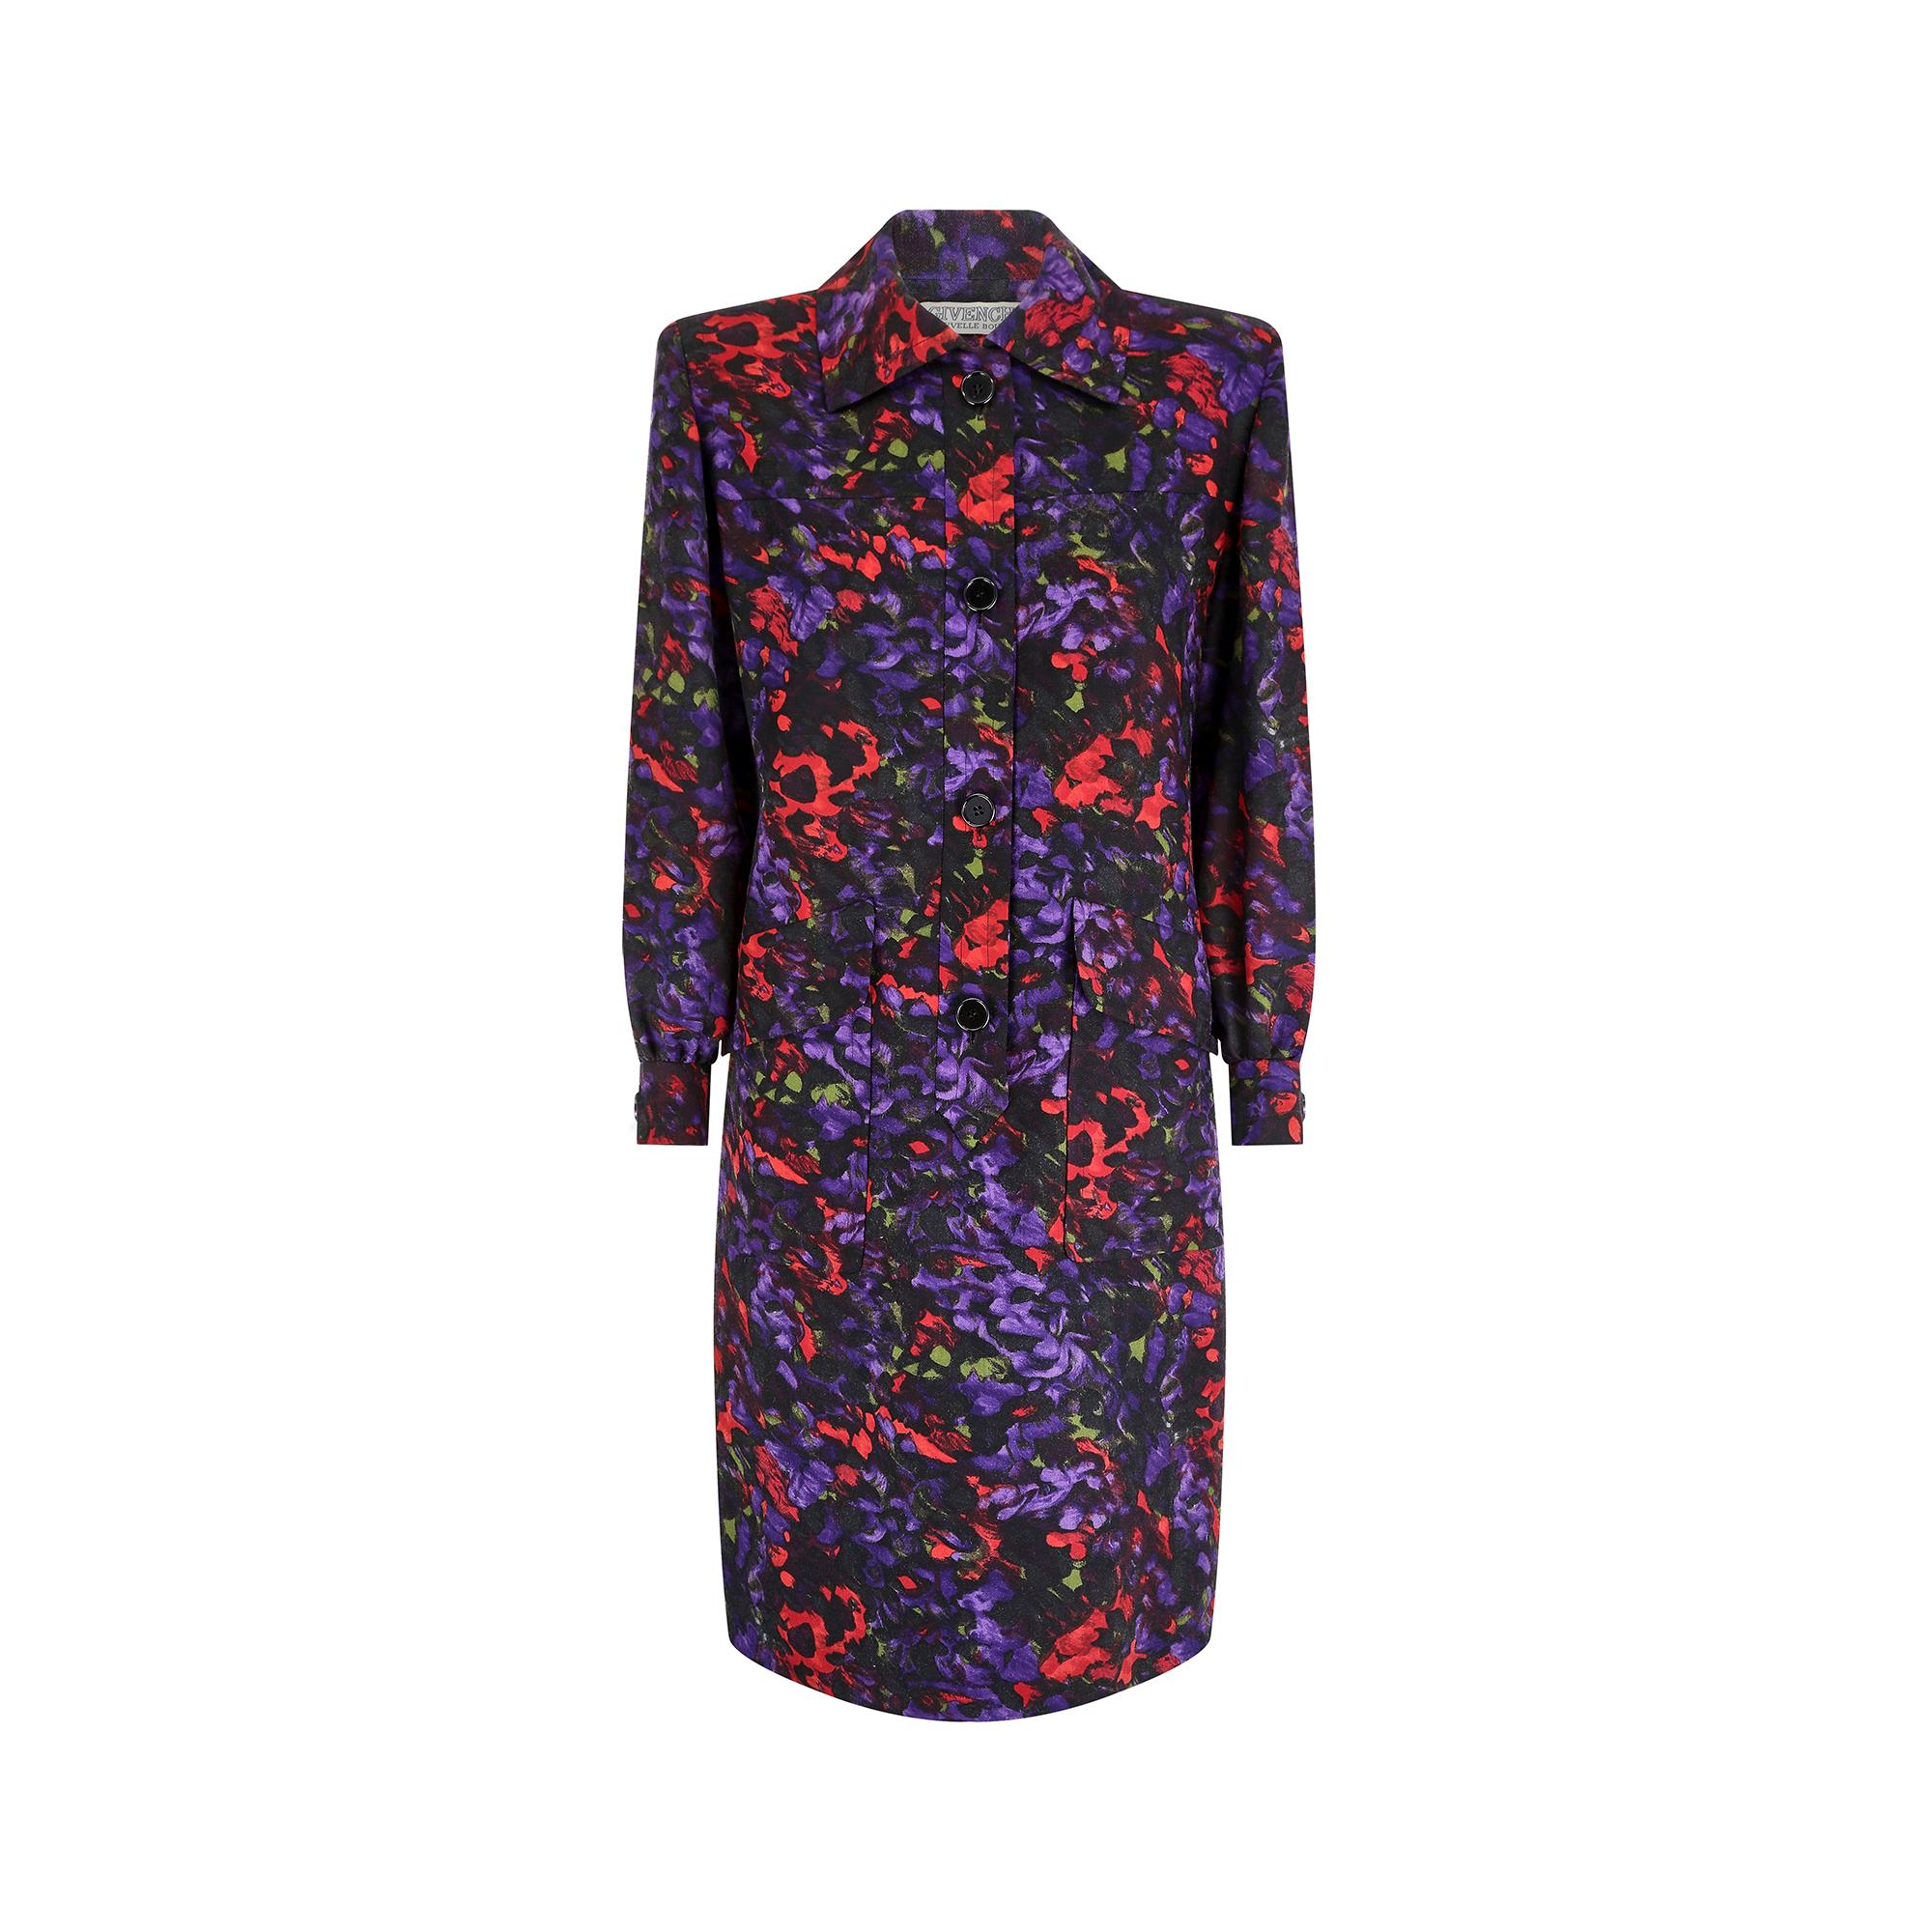 This 1980s Givenchy shirt dress has an elegant abstract floral print on this classic box-cut shirt dress with two diagonal flap pockets on the front, along with a standard yoke and cuff pattern. The simple lines create a classic but structured